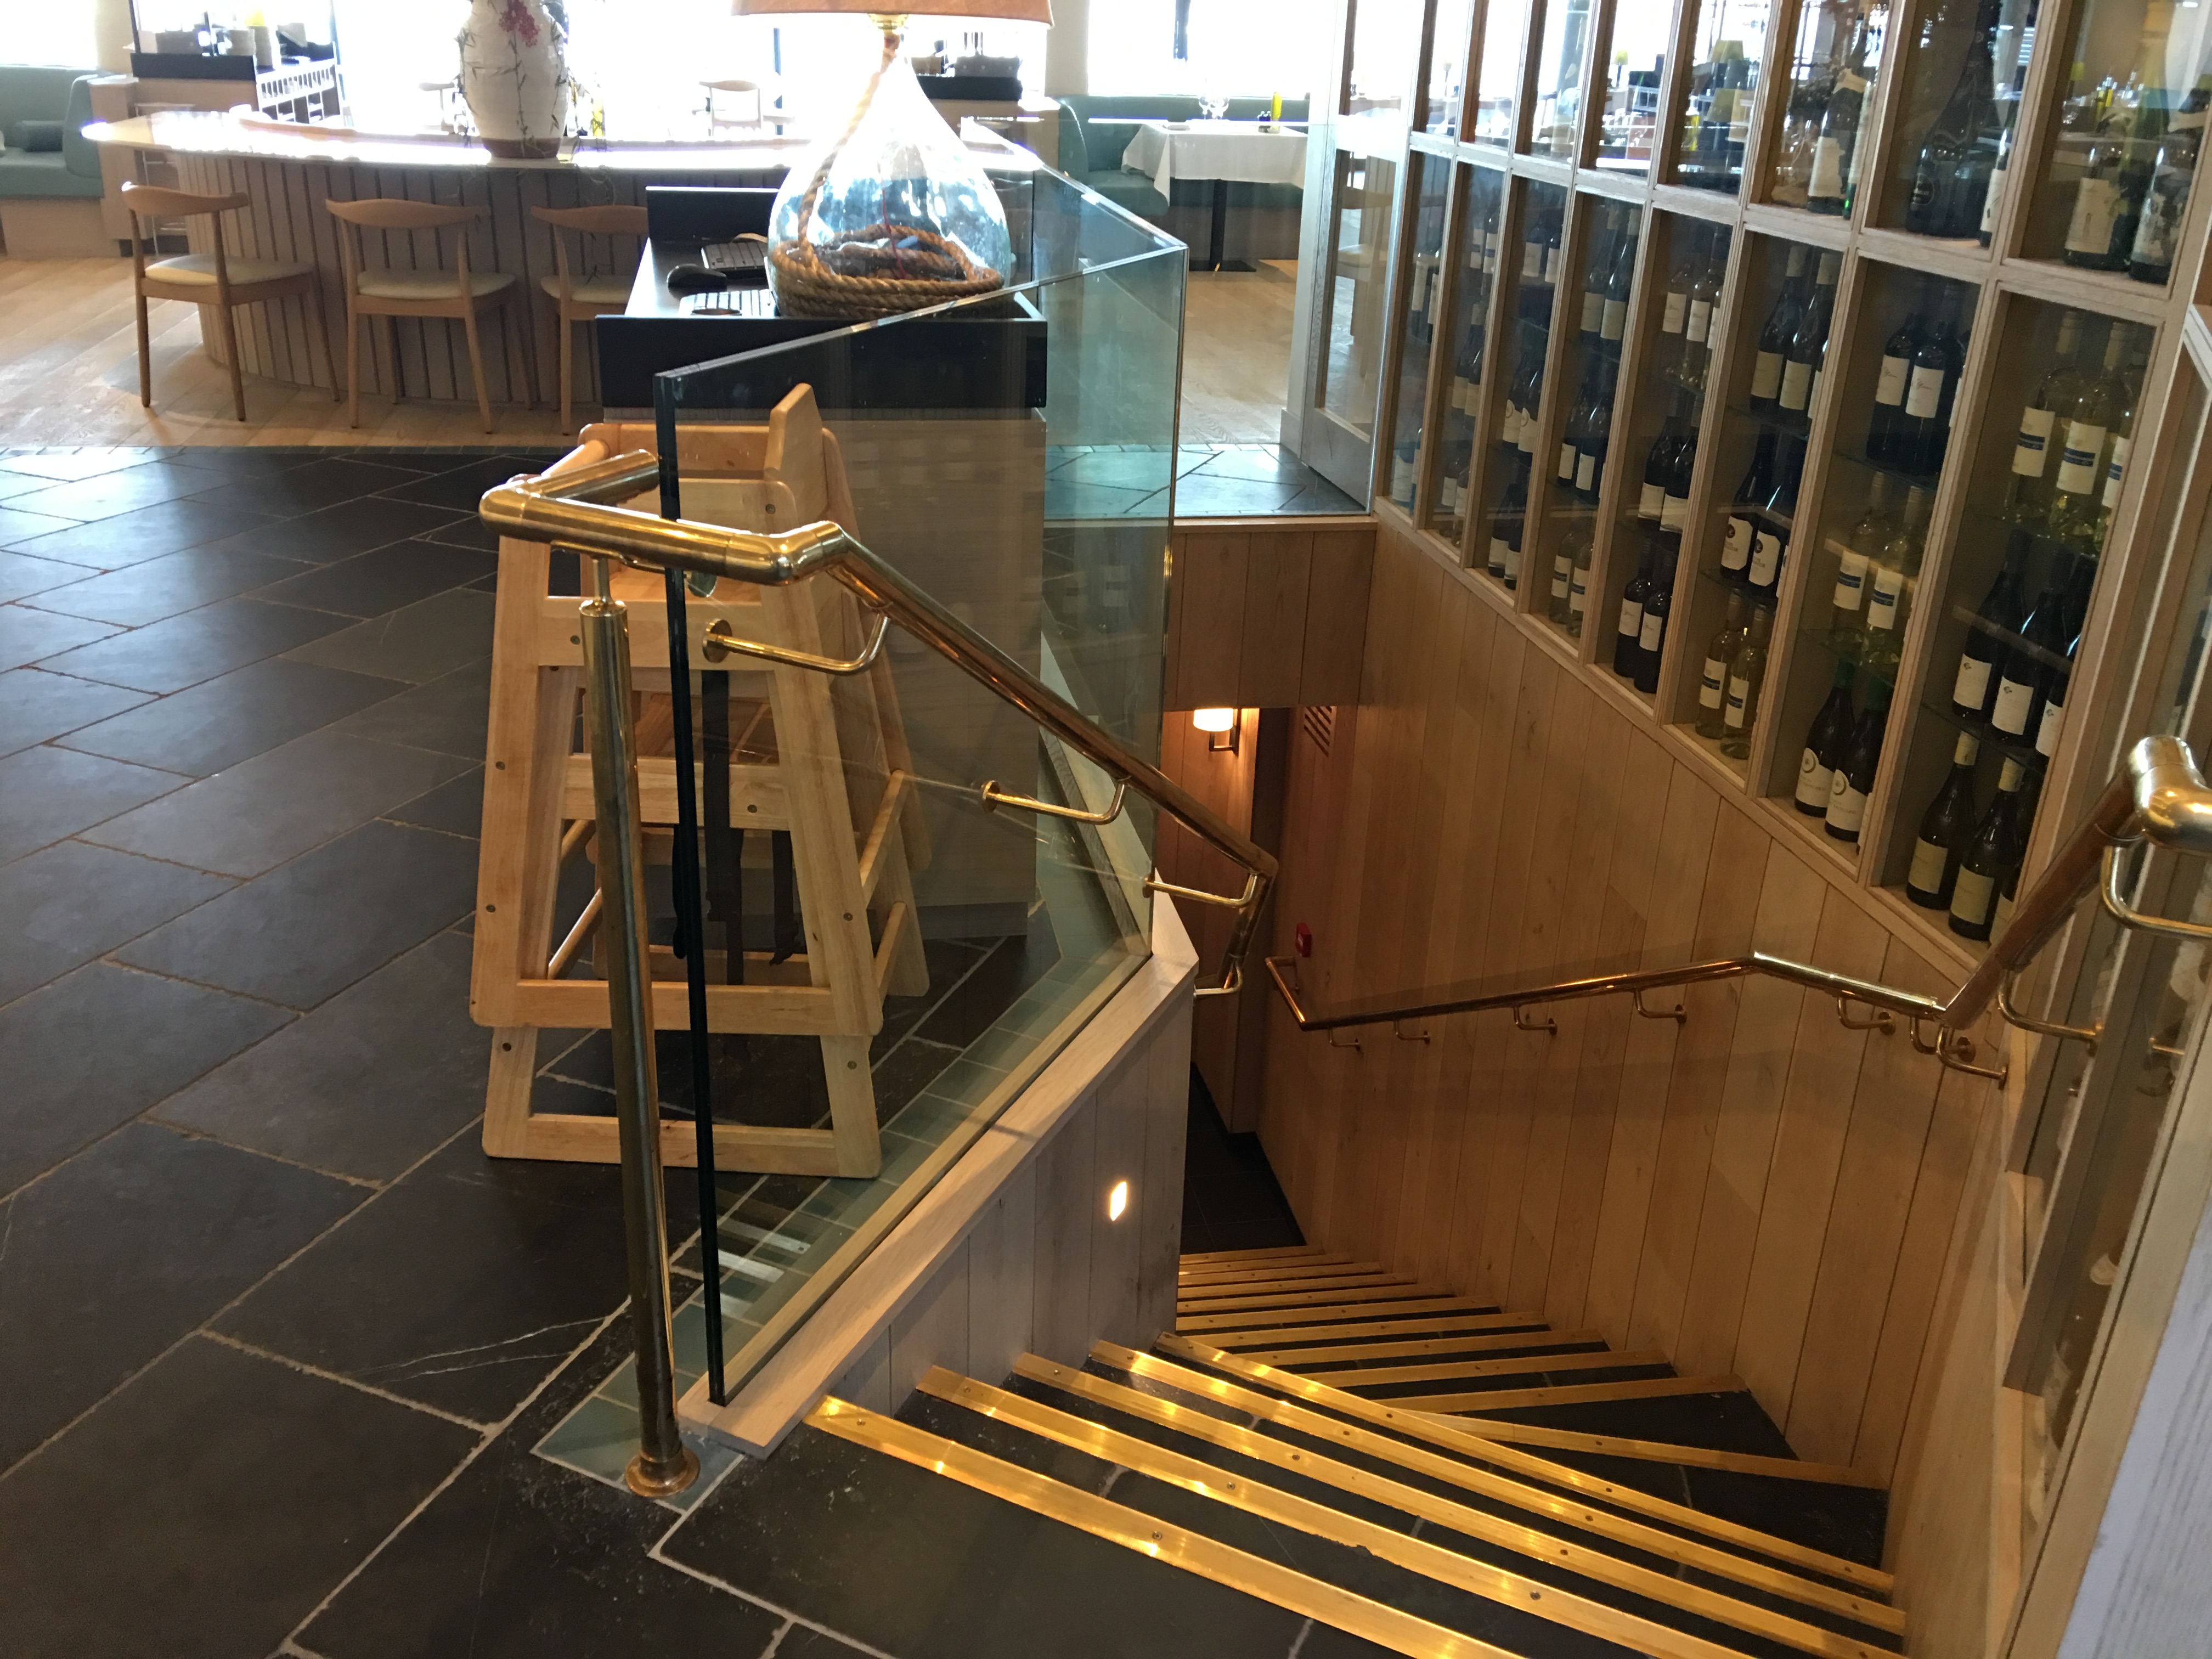 Mild steel staircase with brass handrails and structural glass balustrading.